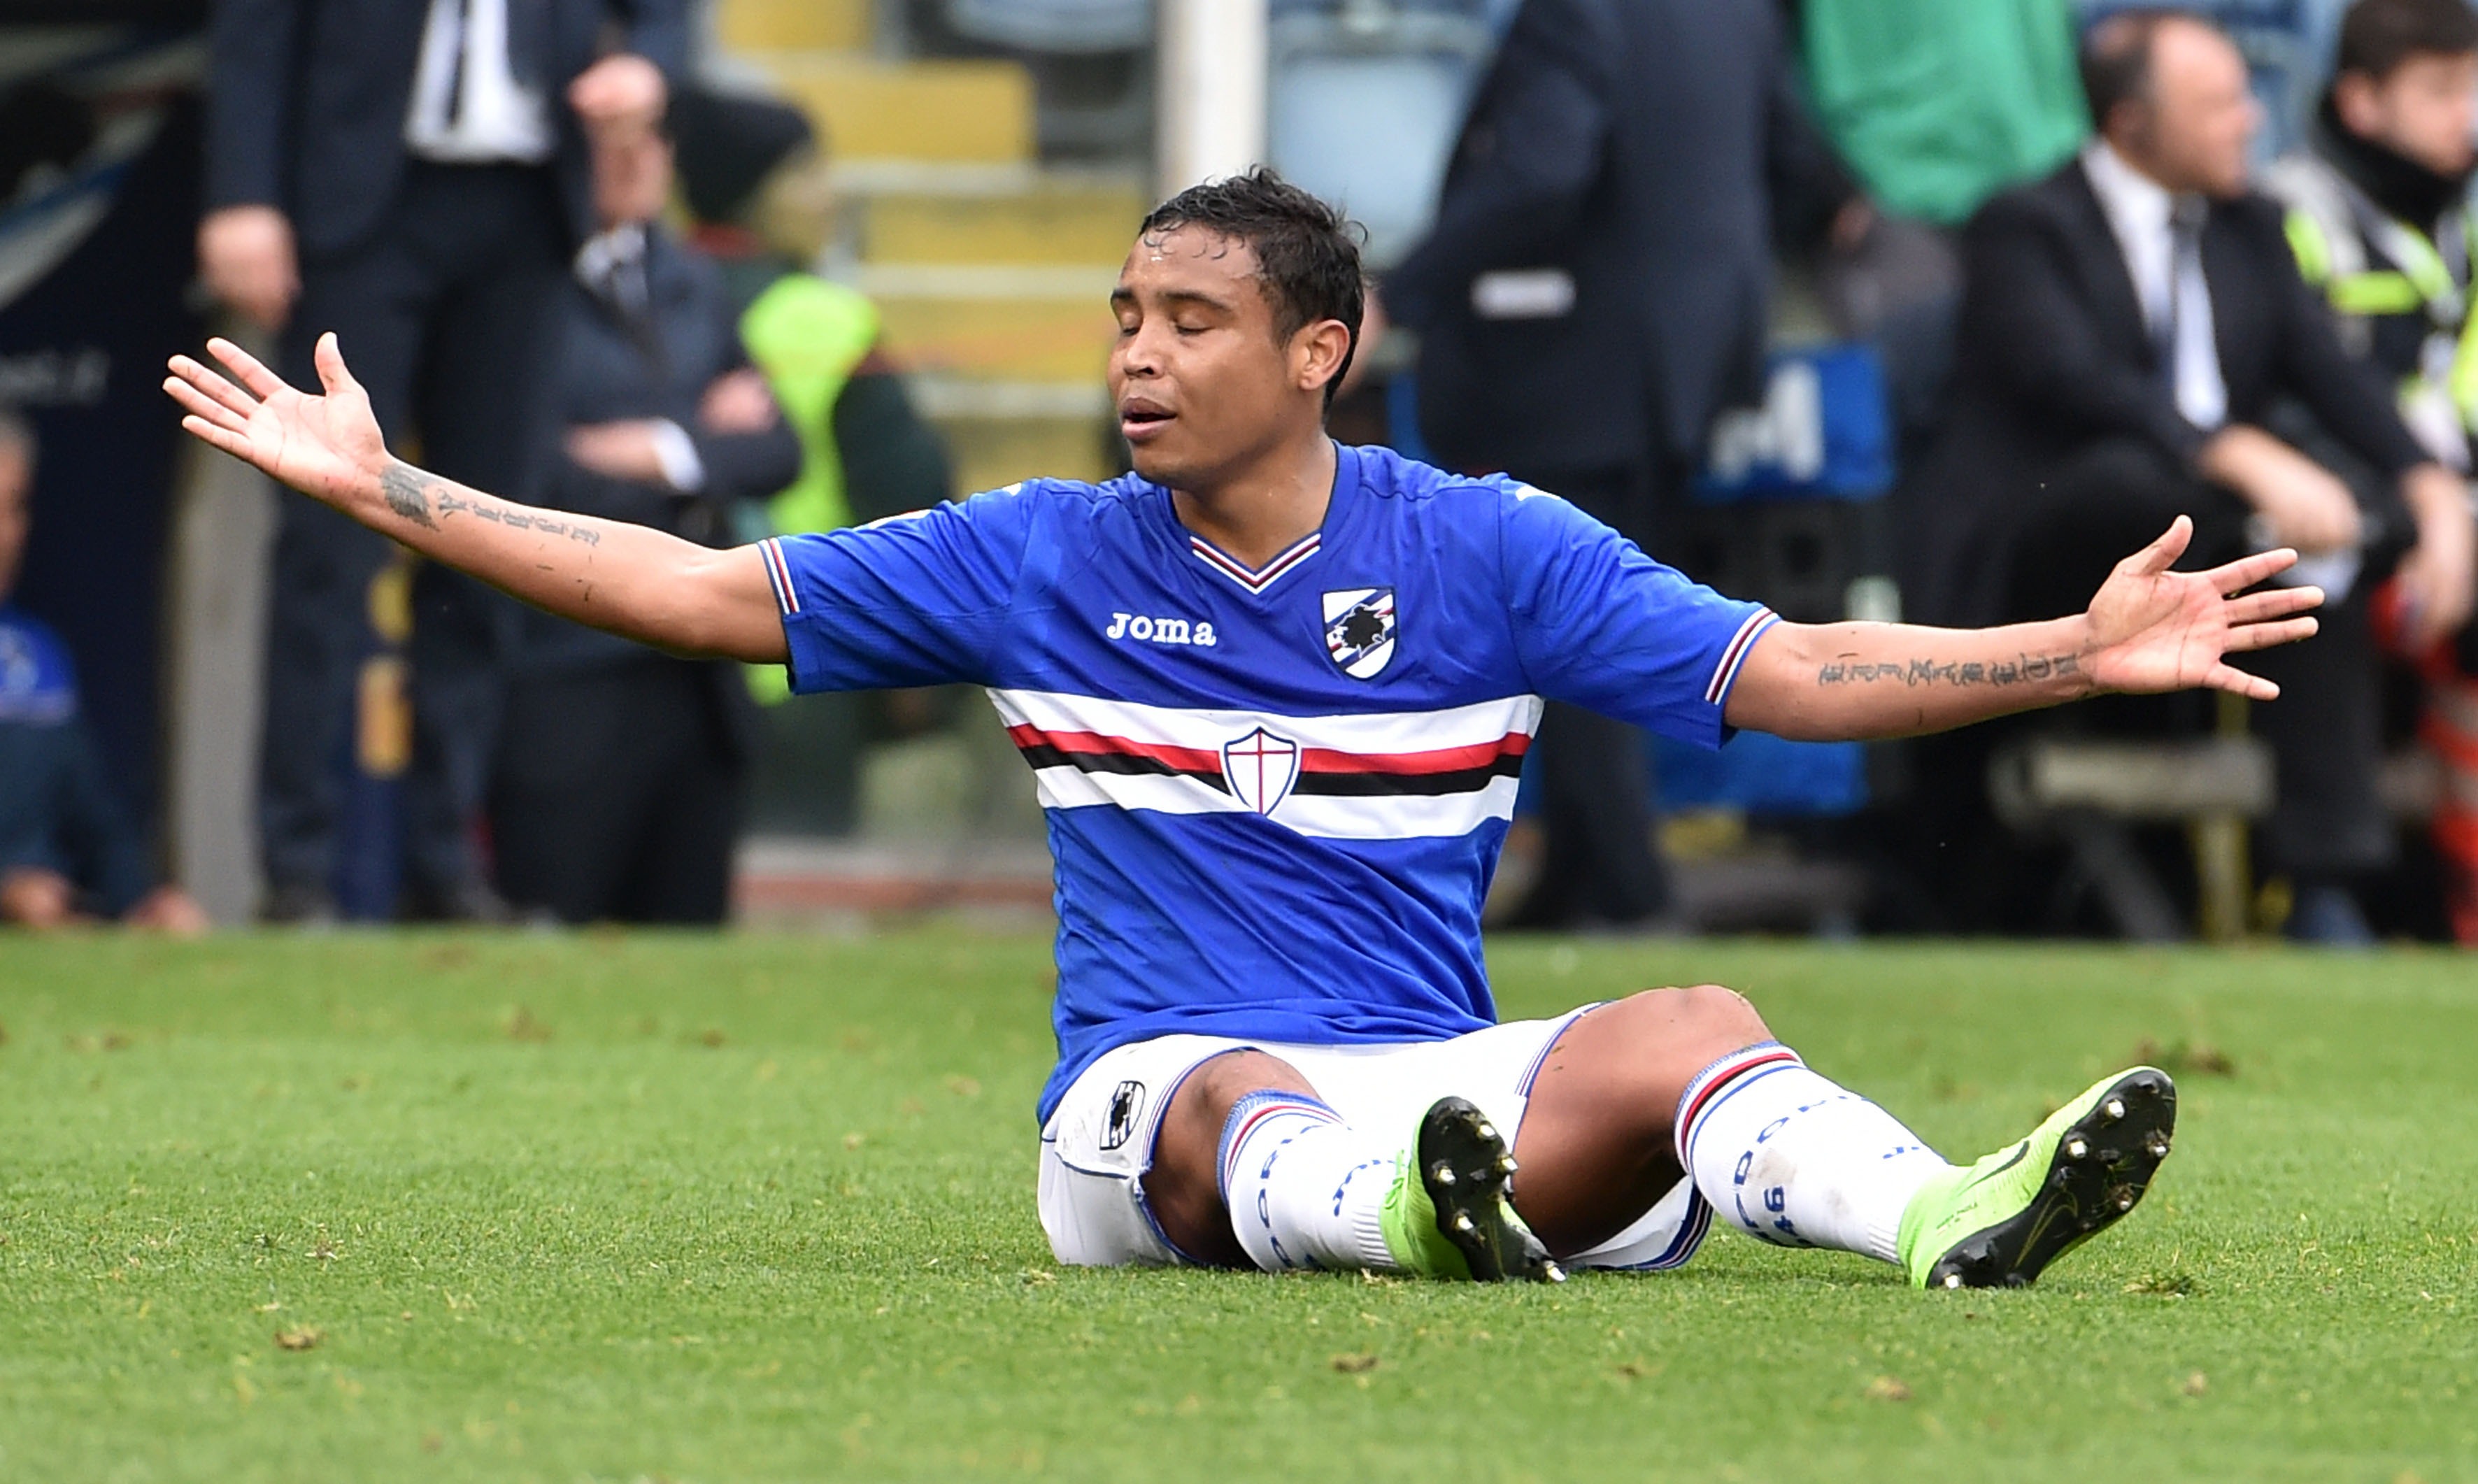 GENOA, ITALY - MARCH 19:  Luis Muriel (Sampdoria) disappointment during the Serie A match between UC Sampdoria and Juventus FC at Stadio Luigi Ferraris on March 19, 2017 in Genoa, Italy.  (Photo by Paolo Rattini/Getty Images)